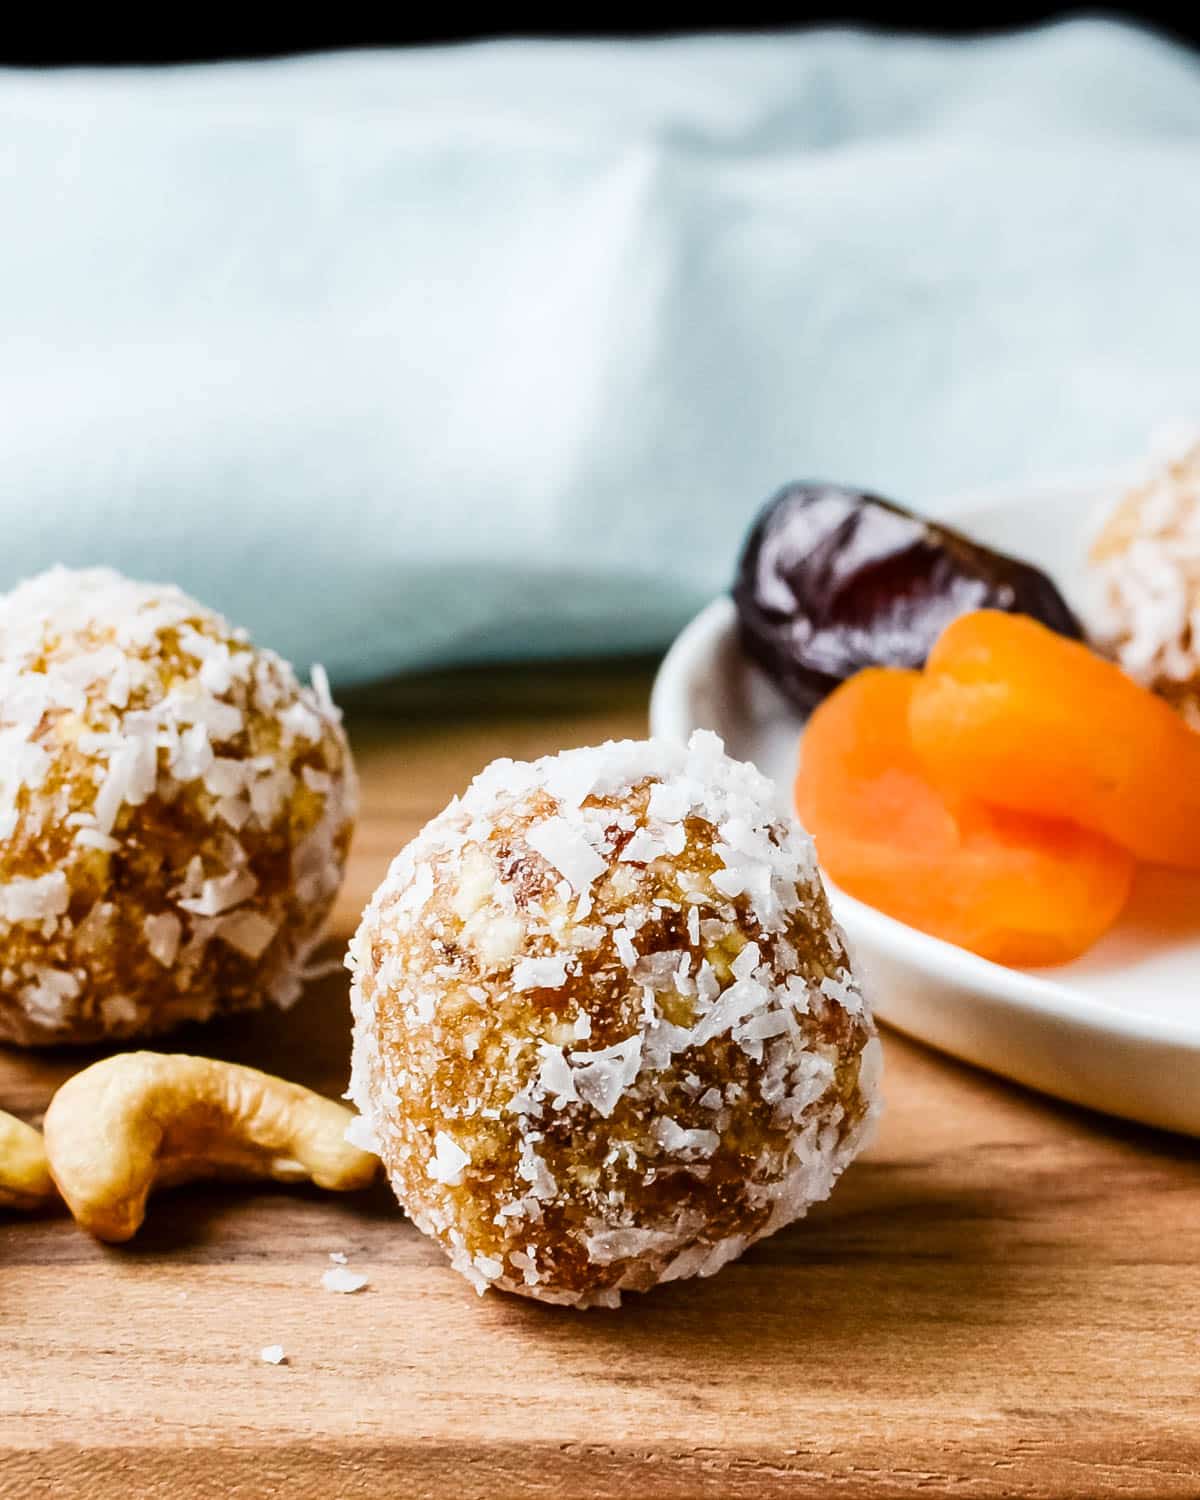 A close-up image of the date balls with apricots and cashews.